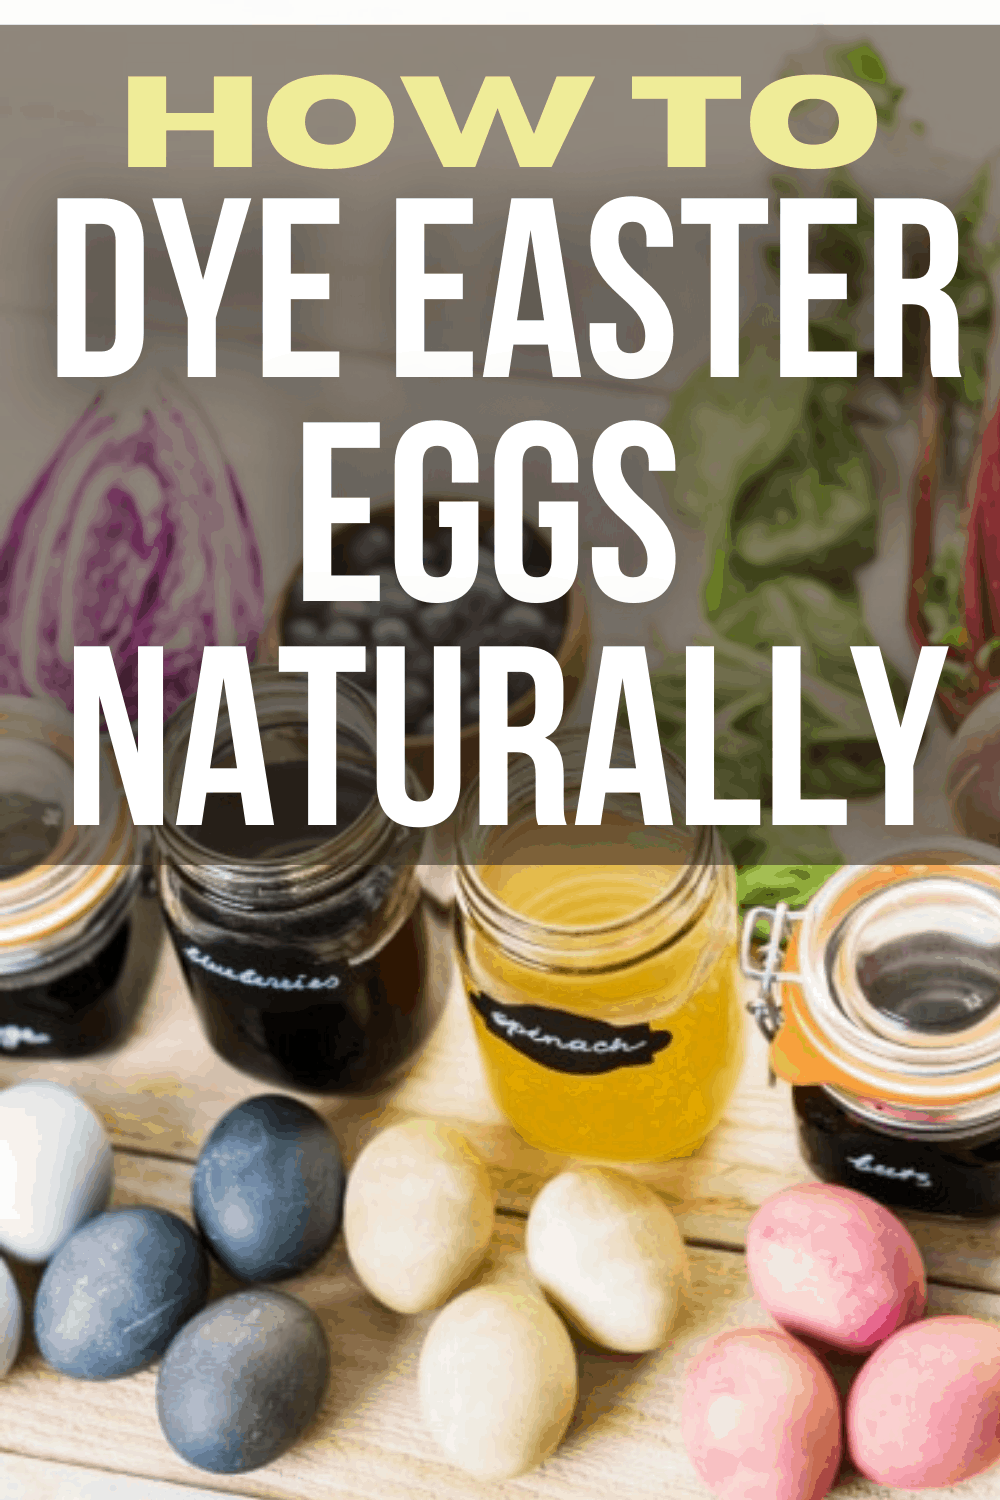 DYE EASTER EGGS NATURALLY (egg dying ideas for kids) text over jars of natural food dye liquids and pastel colored easter eggs